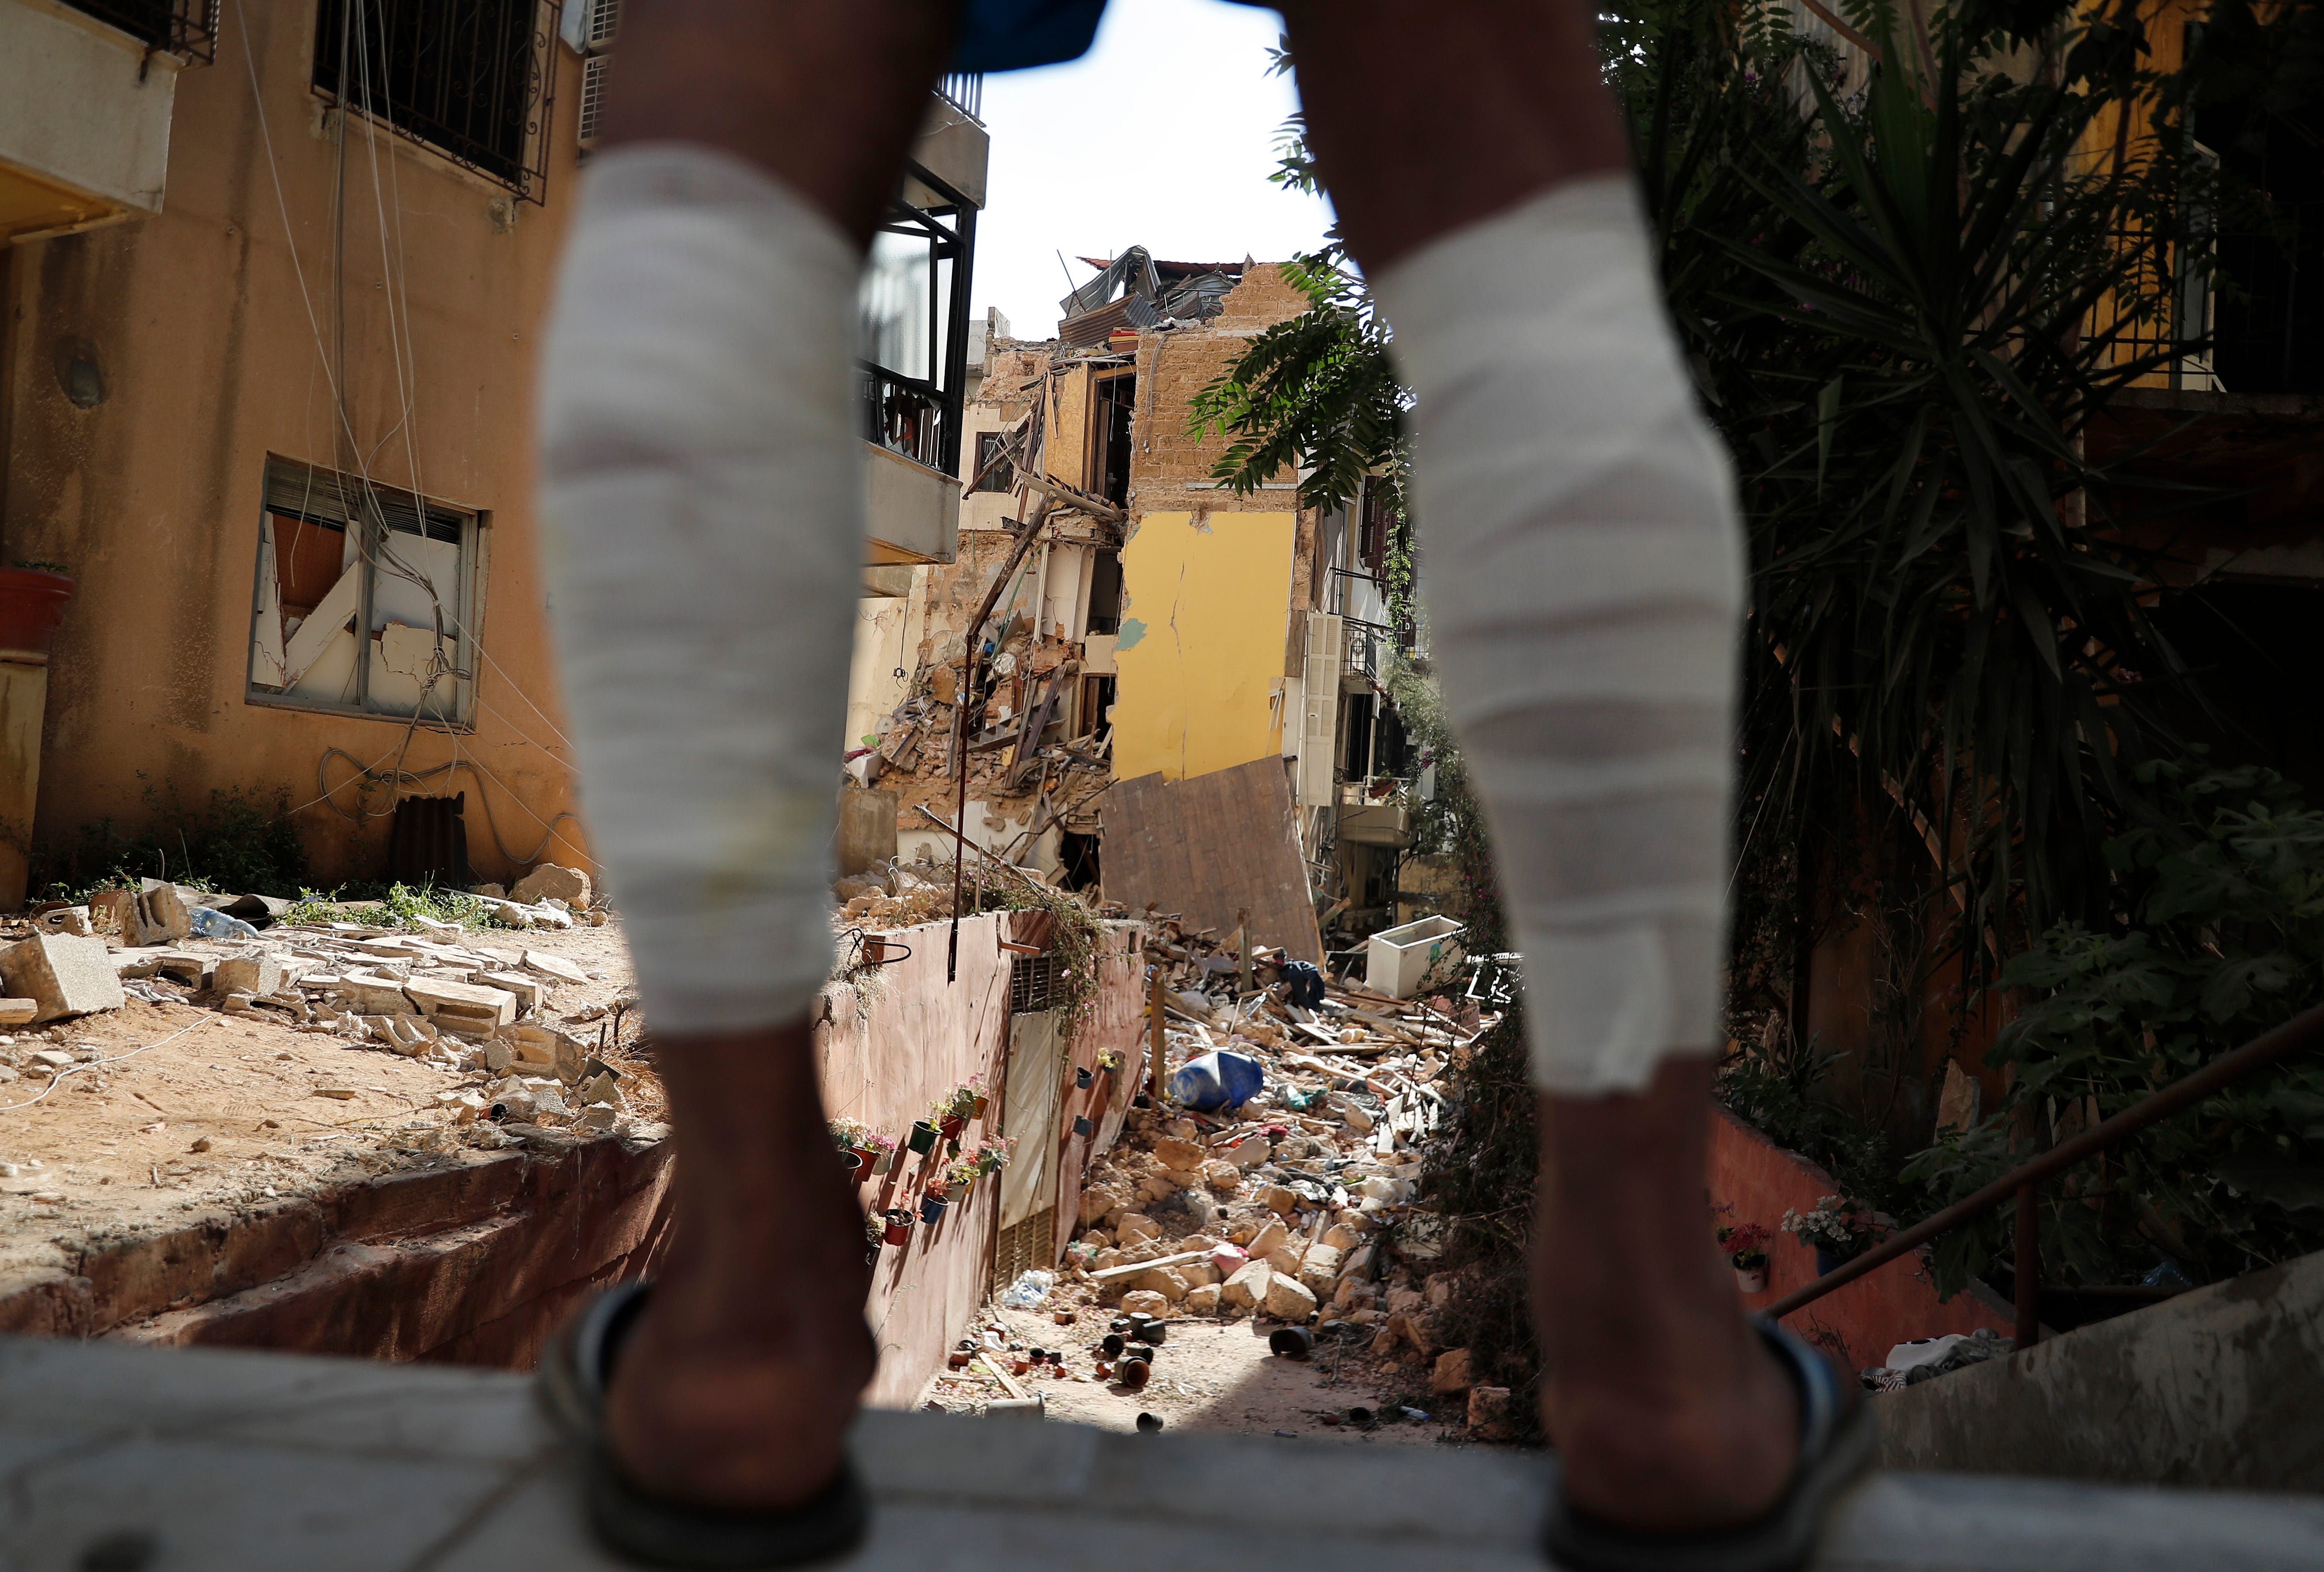 A man whose his legs were injured by Tuesday's explosion that hit the seaport of Beirut, looks on a destroyed house, in Beirut, Lebanon, Friday, Aug. 7, 2020. Rescue teams were still searching the rubble of Beirut's port for bodies on Friday, nearly three days after a massive explosion sent a wave of destruction through Lebanon's capital.